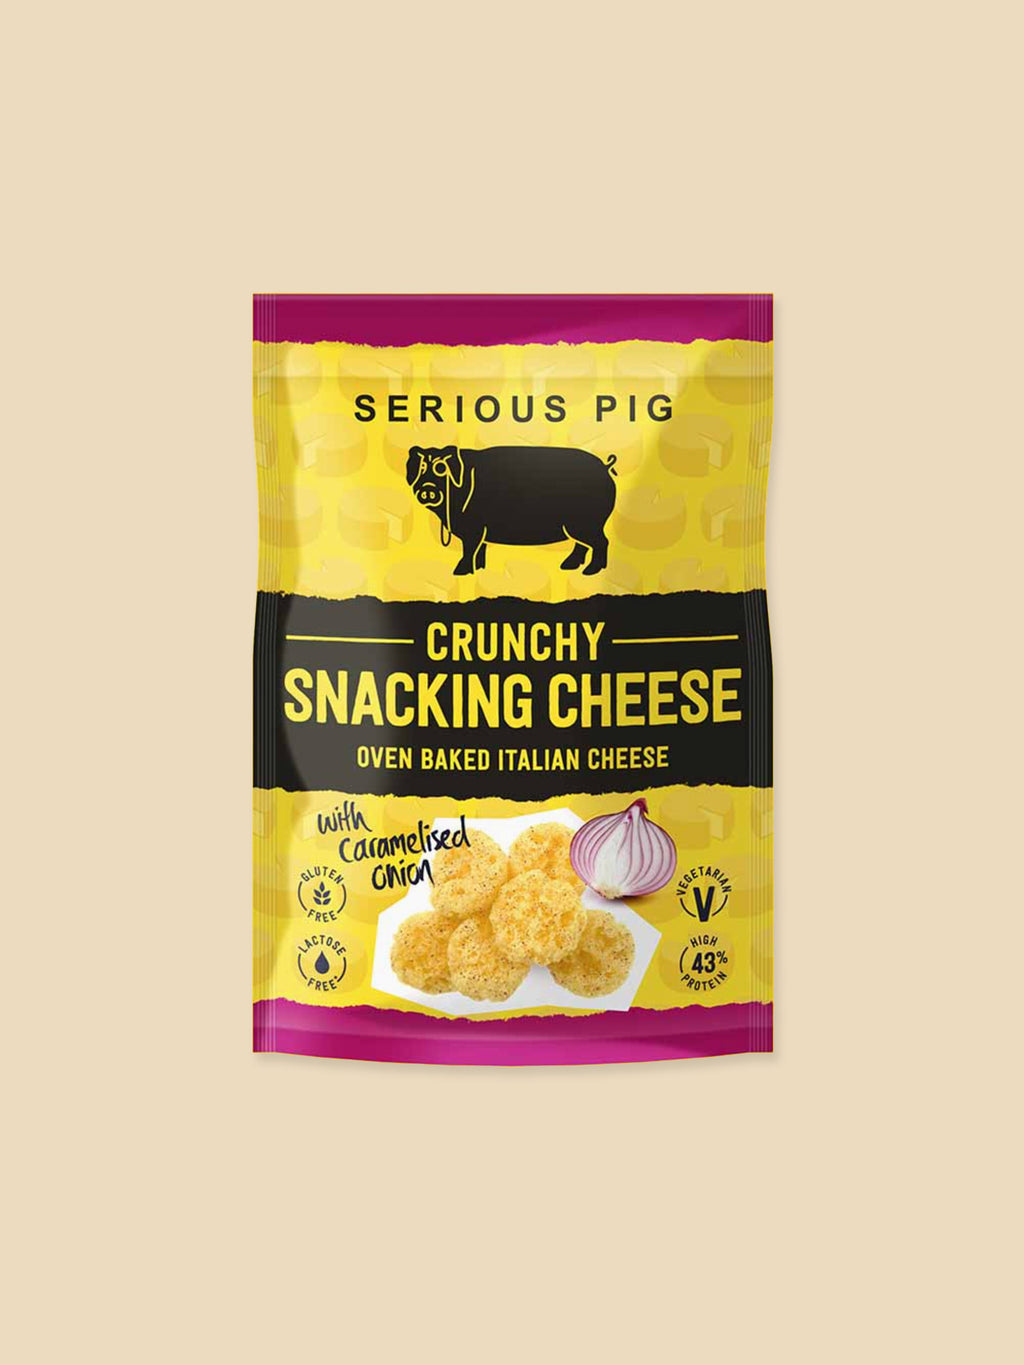 Serious Pig - Italian Crunchy Cheese with Caramelised Onion - 24g